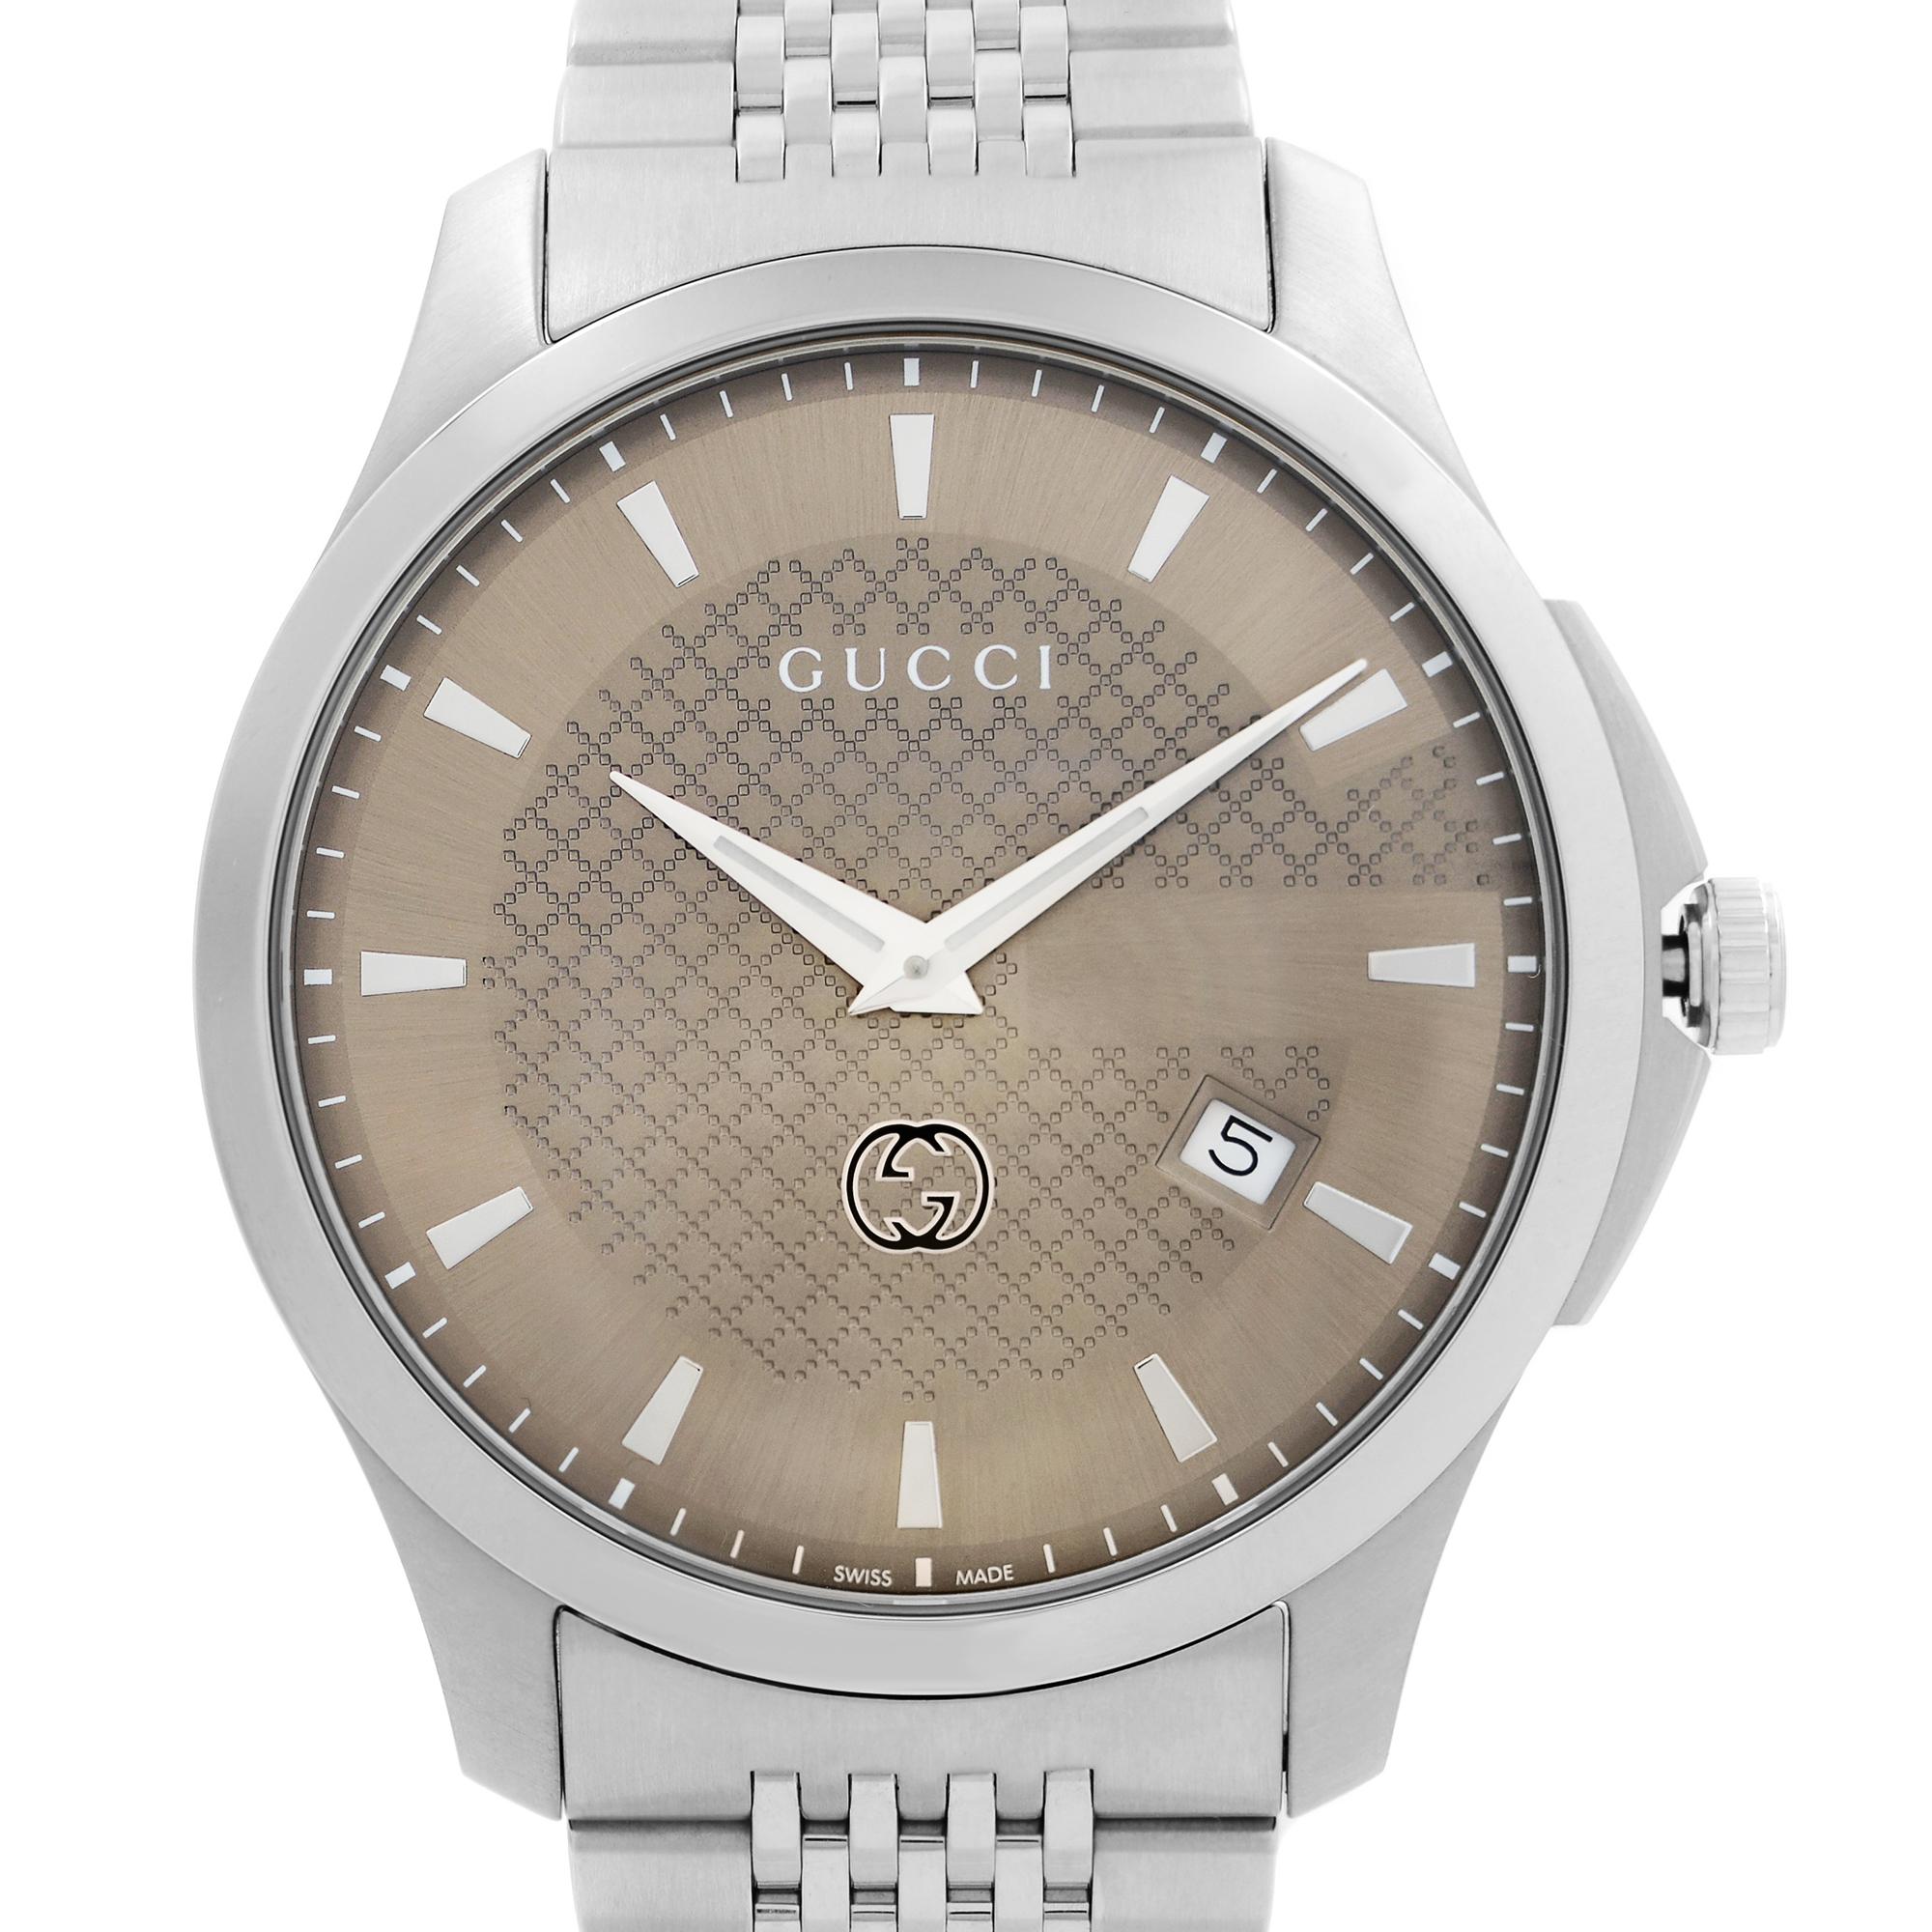 Store Display Model Gucci G-Timeless 40mm Stainless Steel Bronze Dial Quartz Men's Watch YA126349. This Beautiful Timepiece Features: Stainless Steel Case & Bracelet, Quartz Movement, 50m Water Resistance. Original Box and Papers are Included.